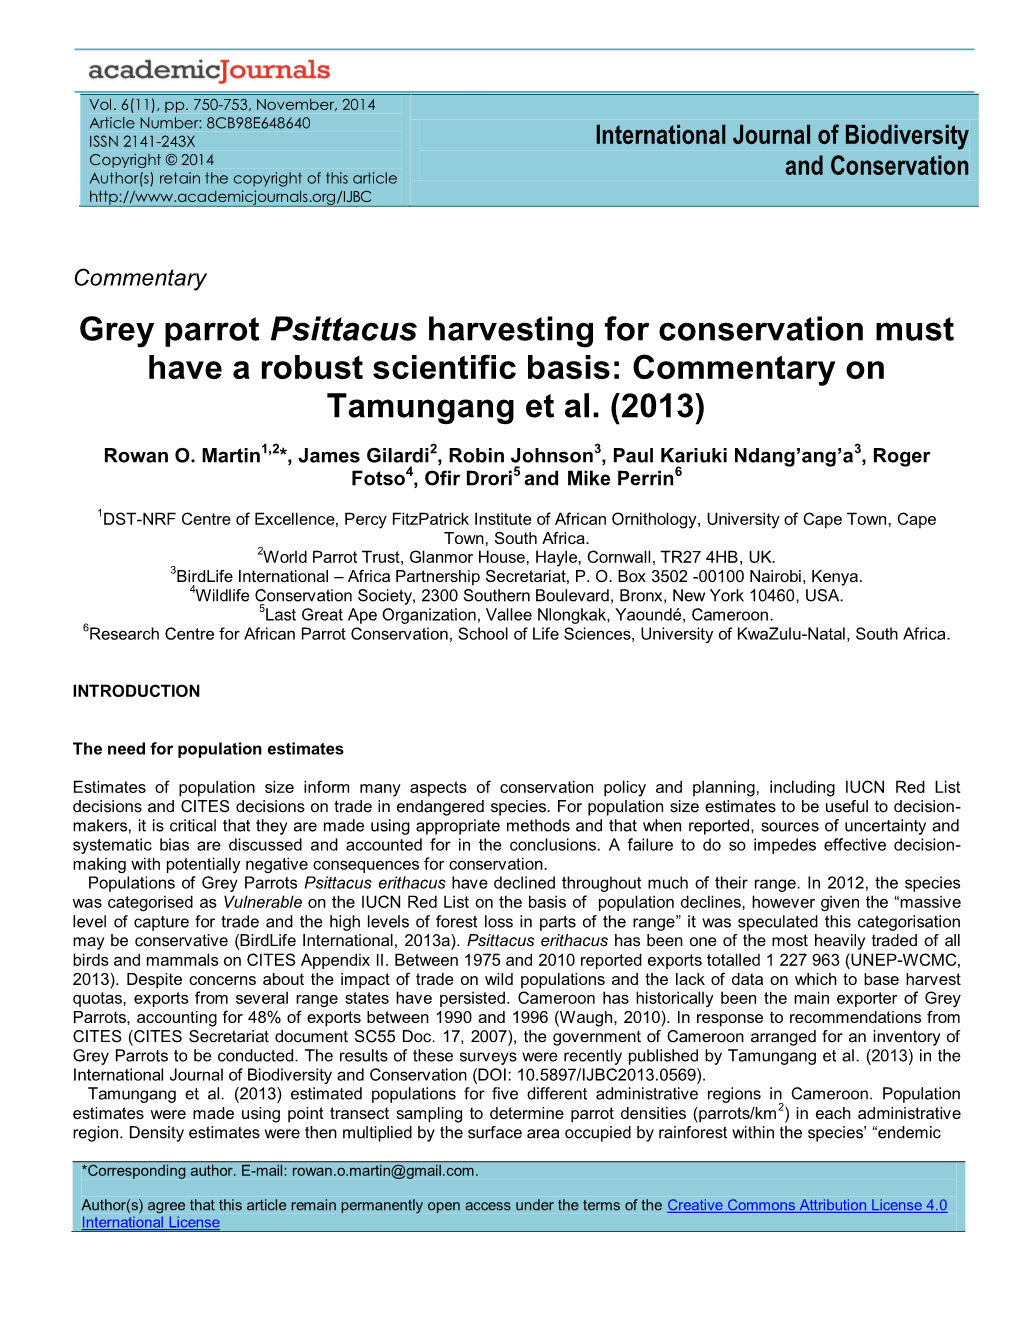 Grey Parrot Psittacus Harvesting for Conservation Must Have a Robust Scientific Basis: Commentary on Tamungang Et Al